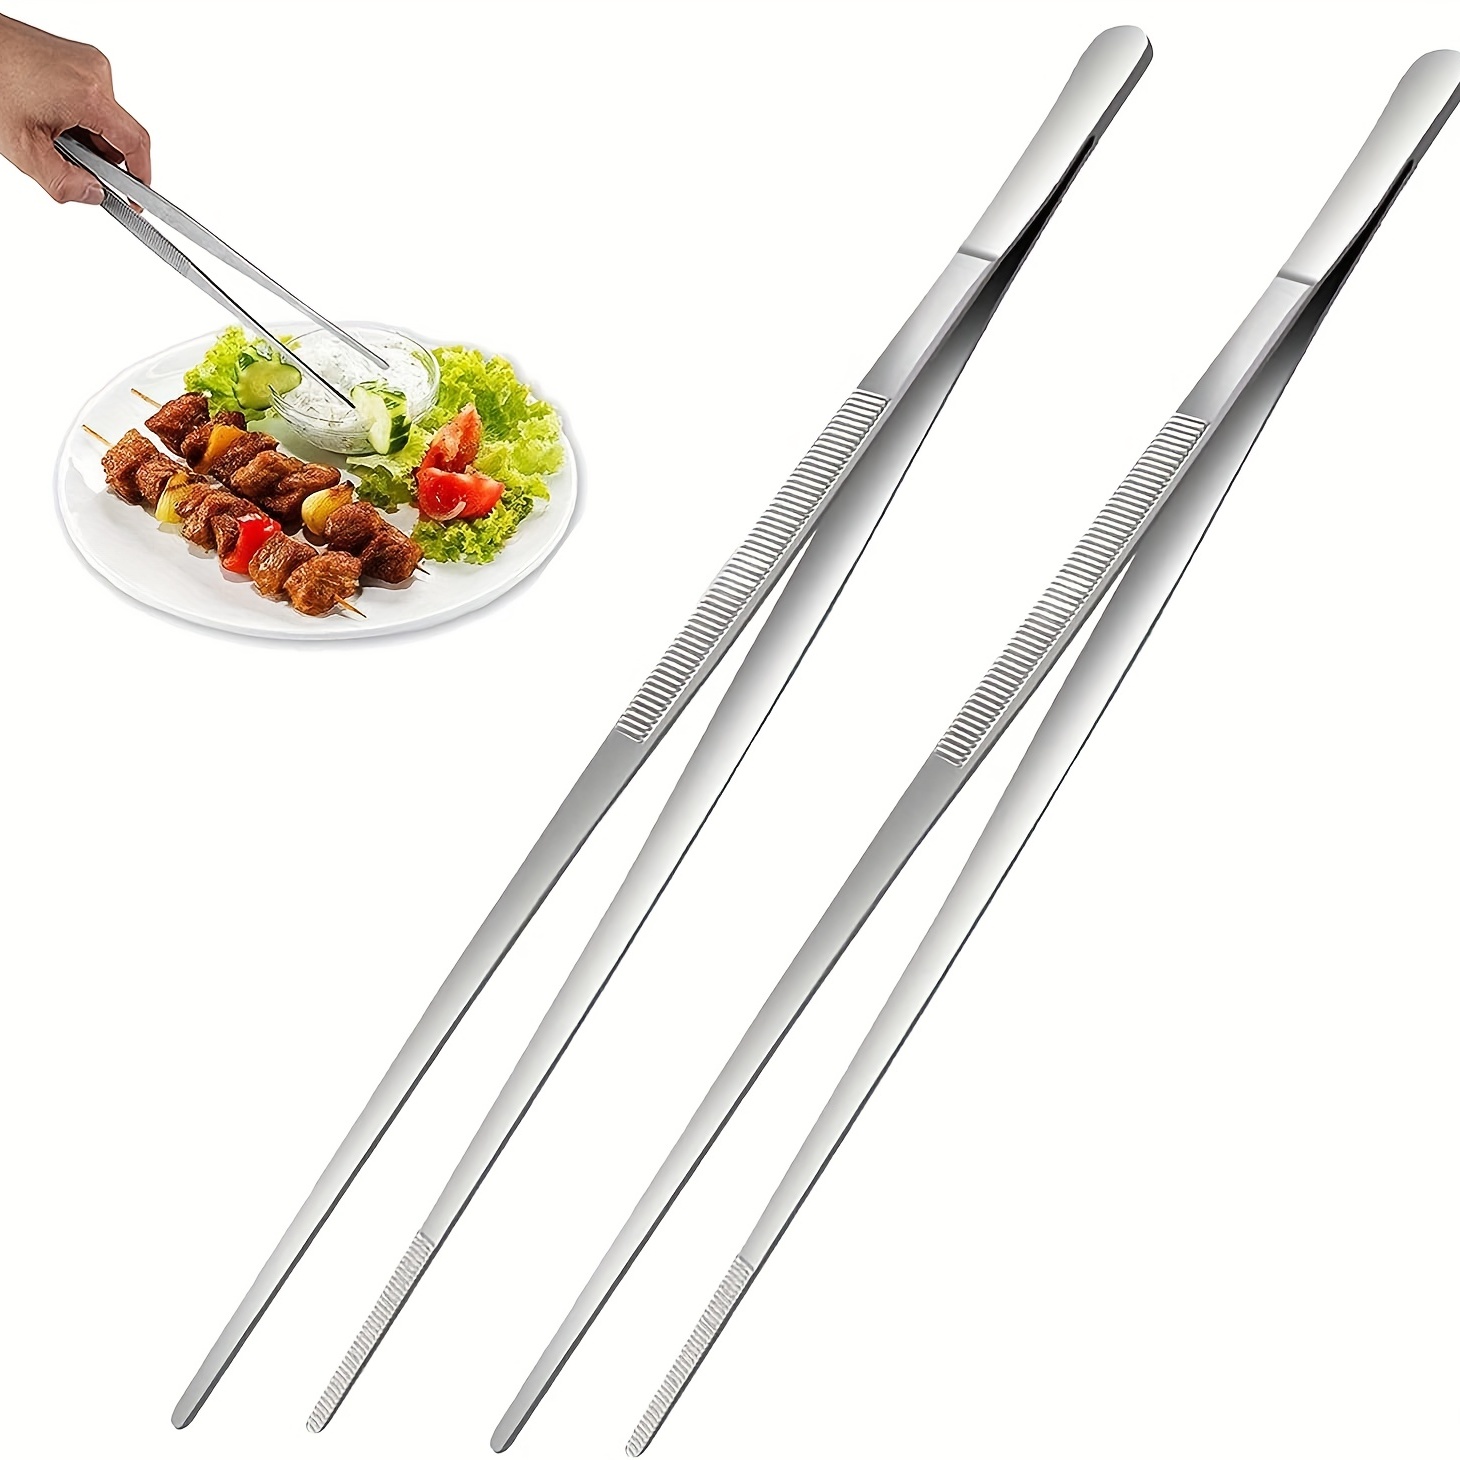 Kitchen tongs kitchen utensils BBQ Tweezer Food Clip kitchen Chief Tongs  Stainless Steel Portable for Picnic Barbecue Cooking